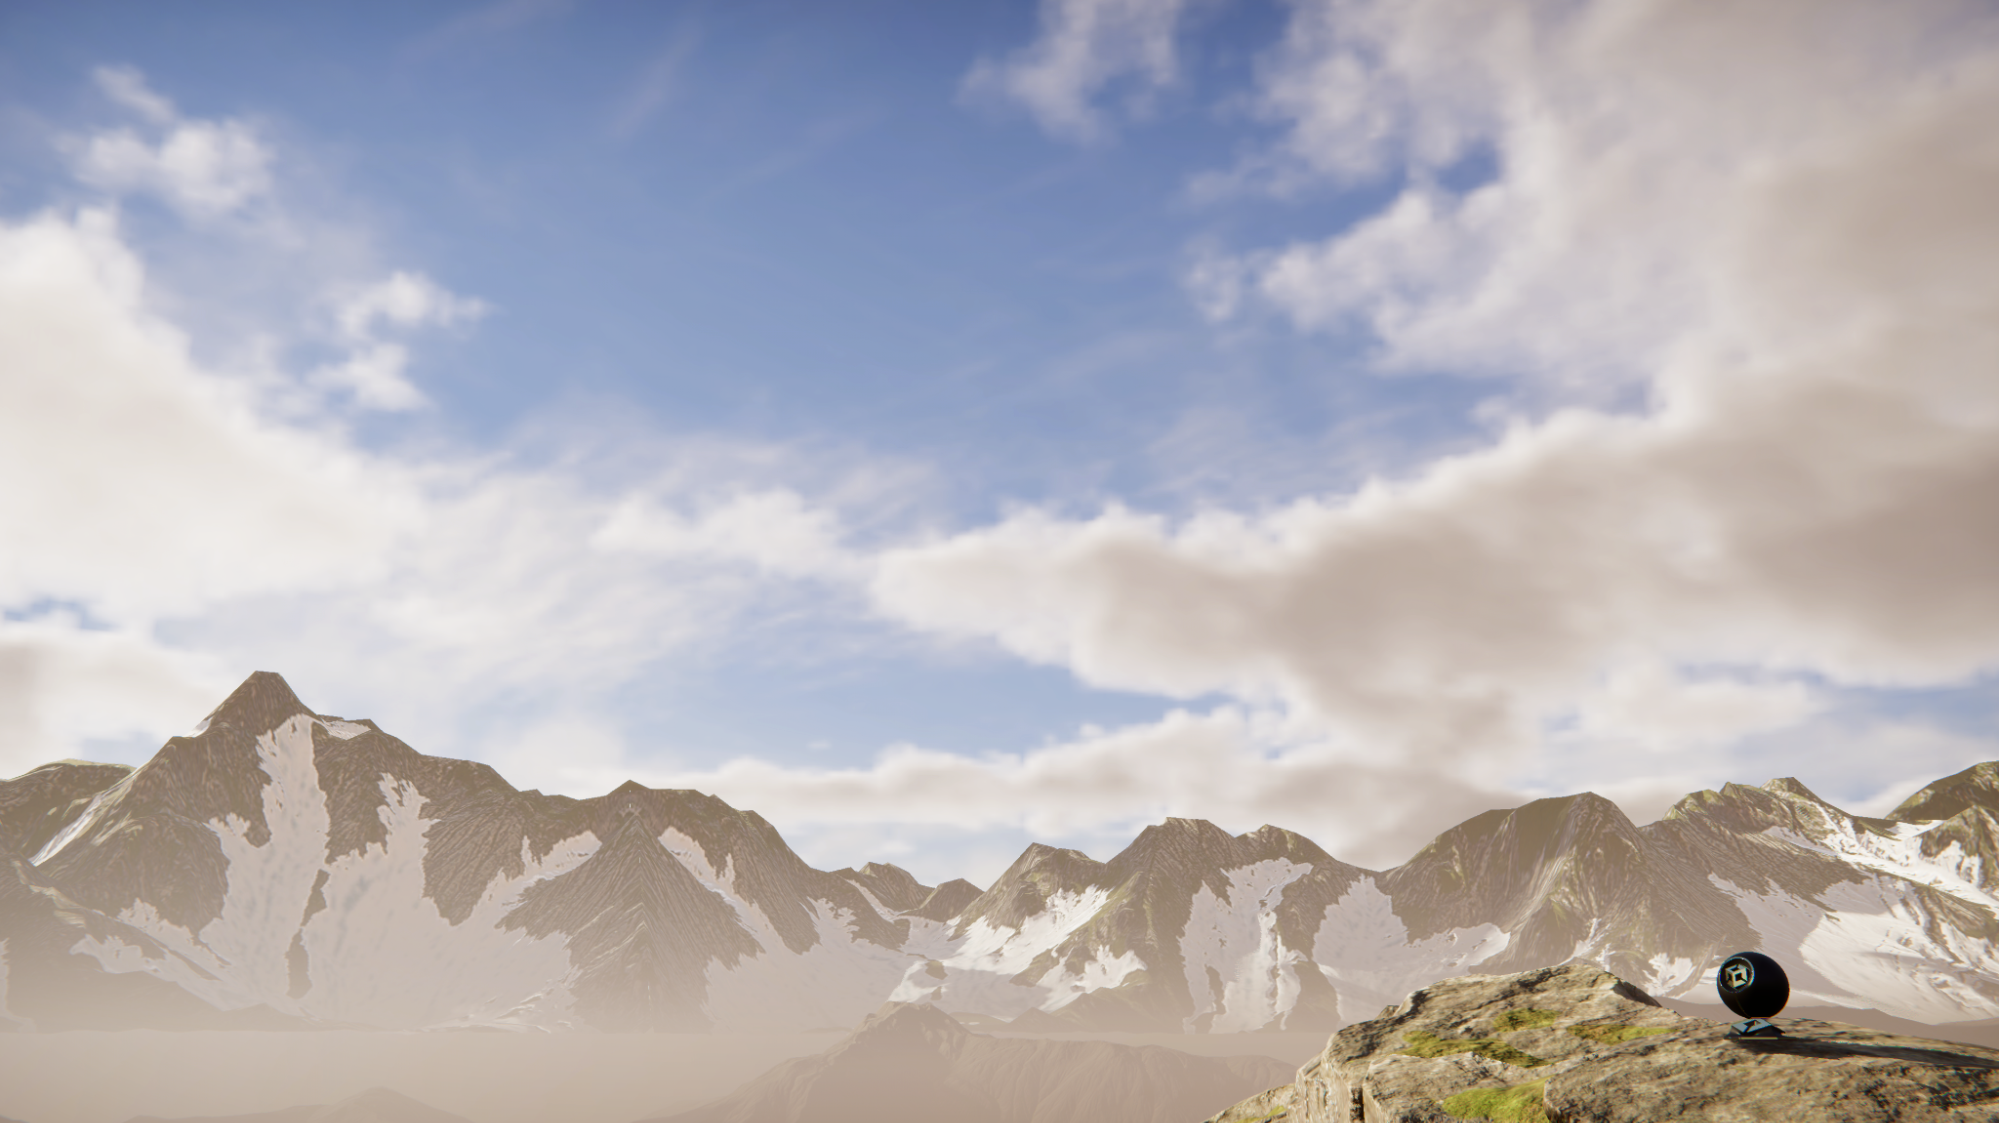 Unity_High Definition Render Pipeline_Clouds_Unity 2022 LTS